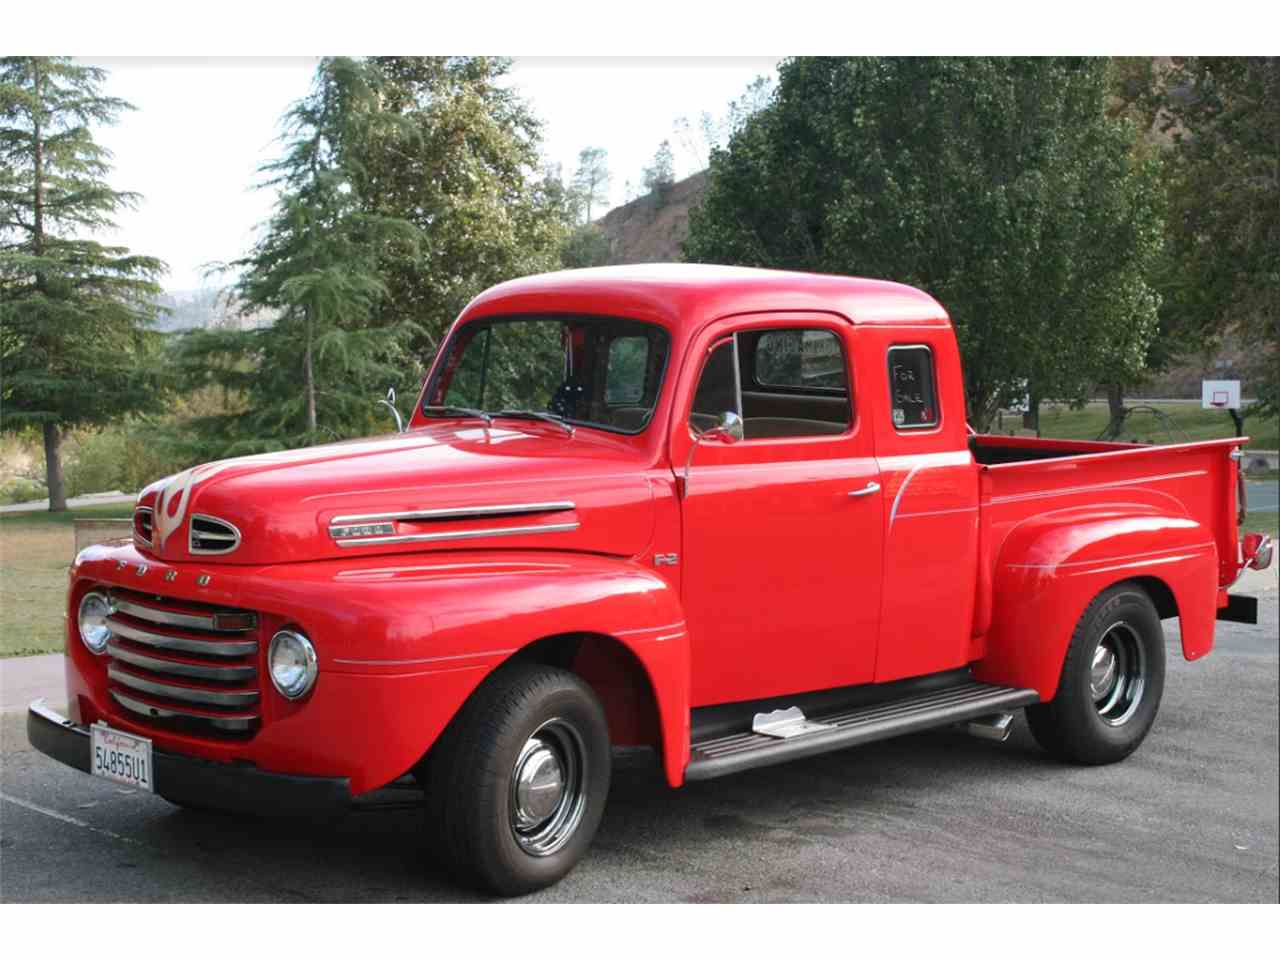 1950 Ford Pickup for Sale | ClassicCars.com | CC-1007767